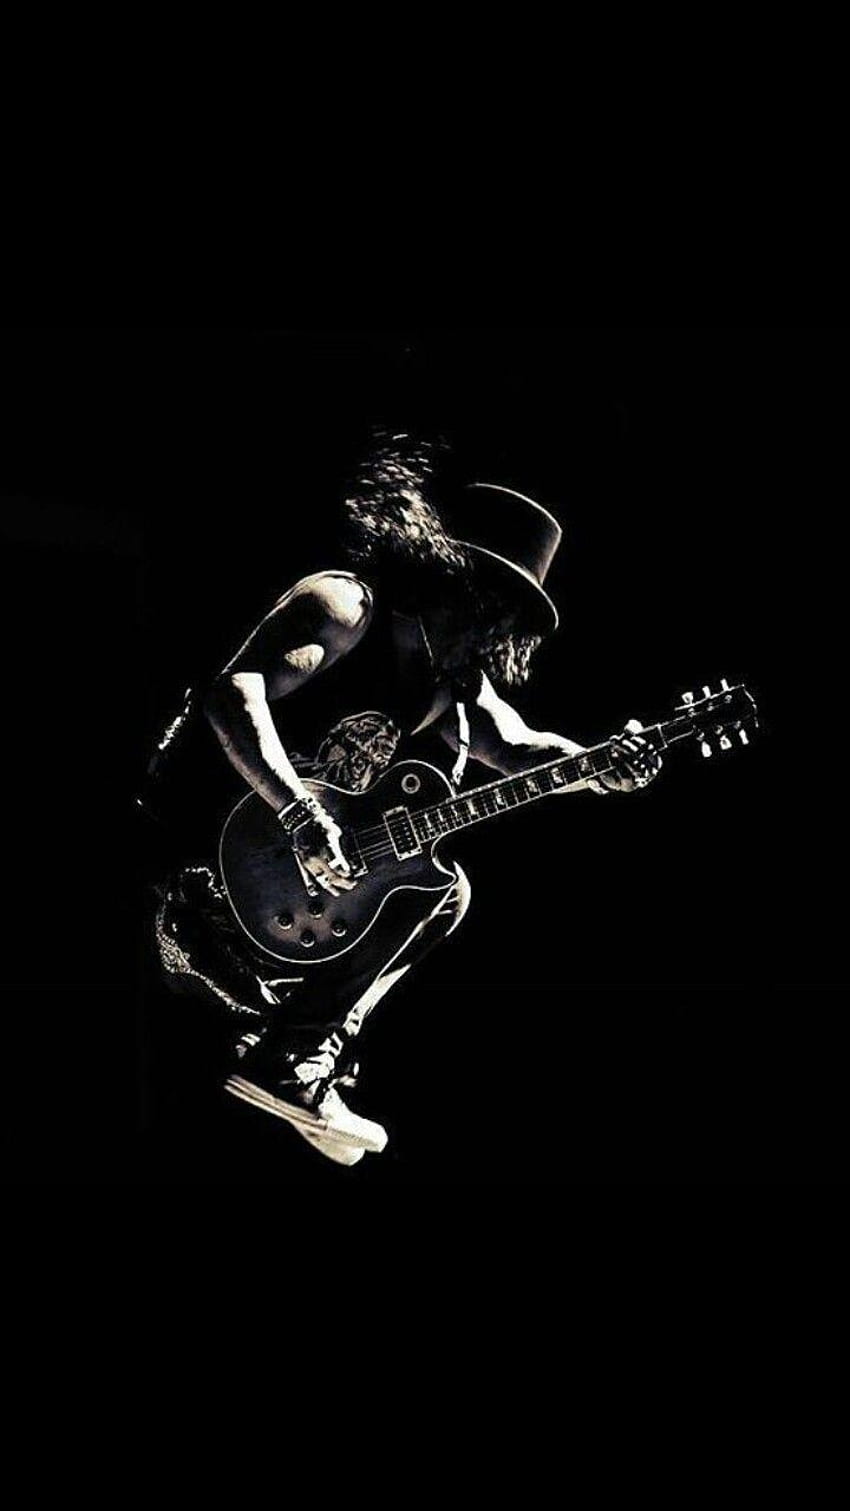 I Love This , When Guitarists Jumping From Heights And Still, slash guns n roses HD phone wallpaper